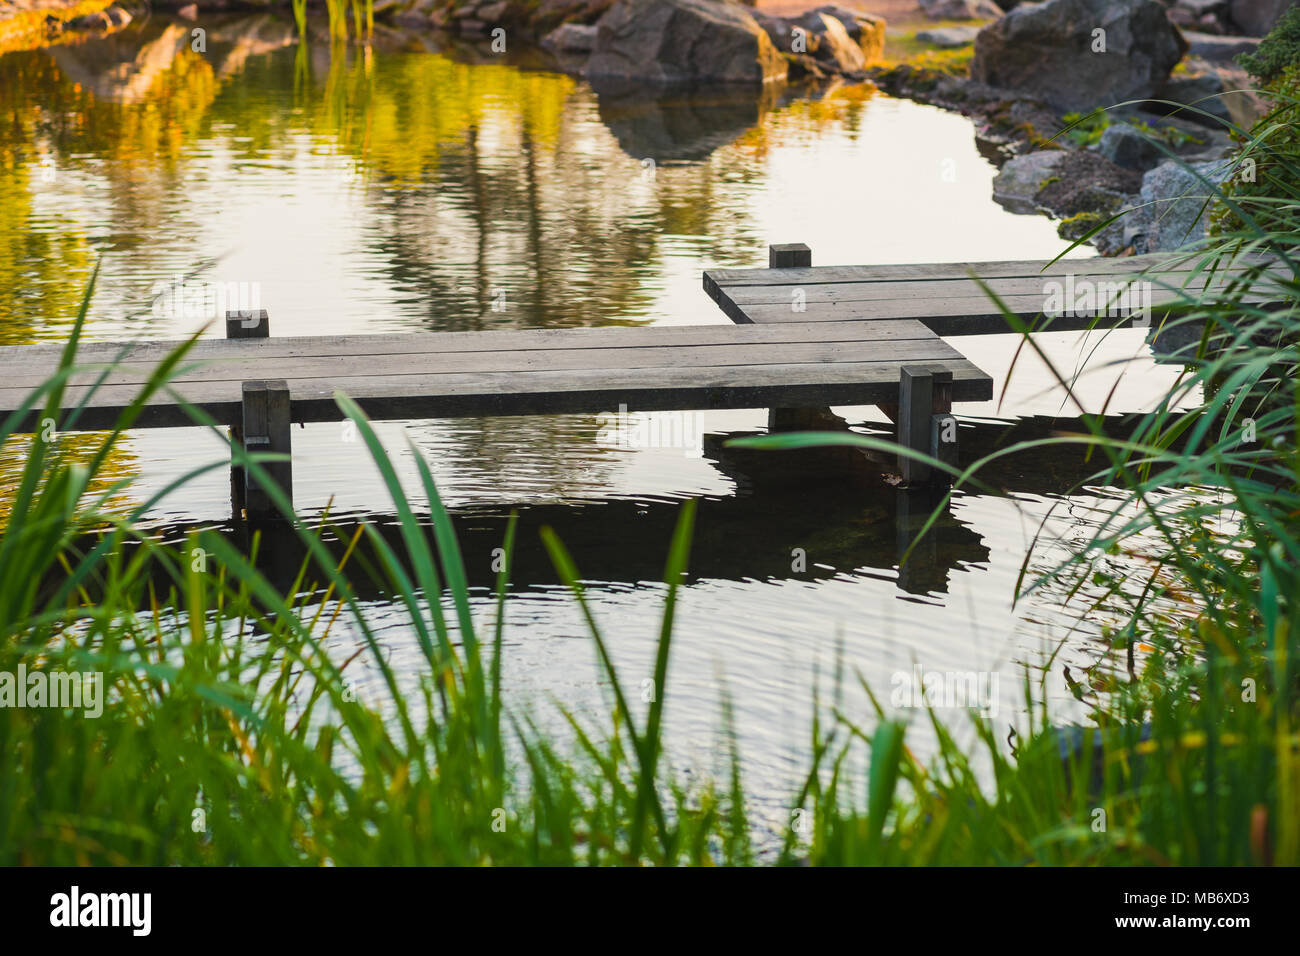 Wooden bridge in Japanese style over a pond in a garden Stock Photo